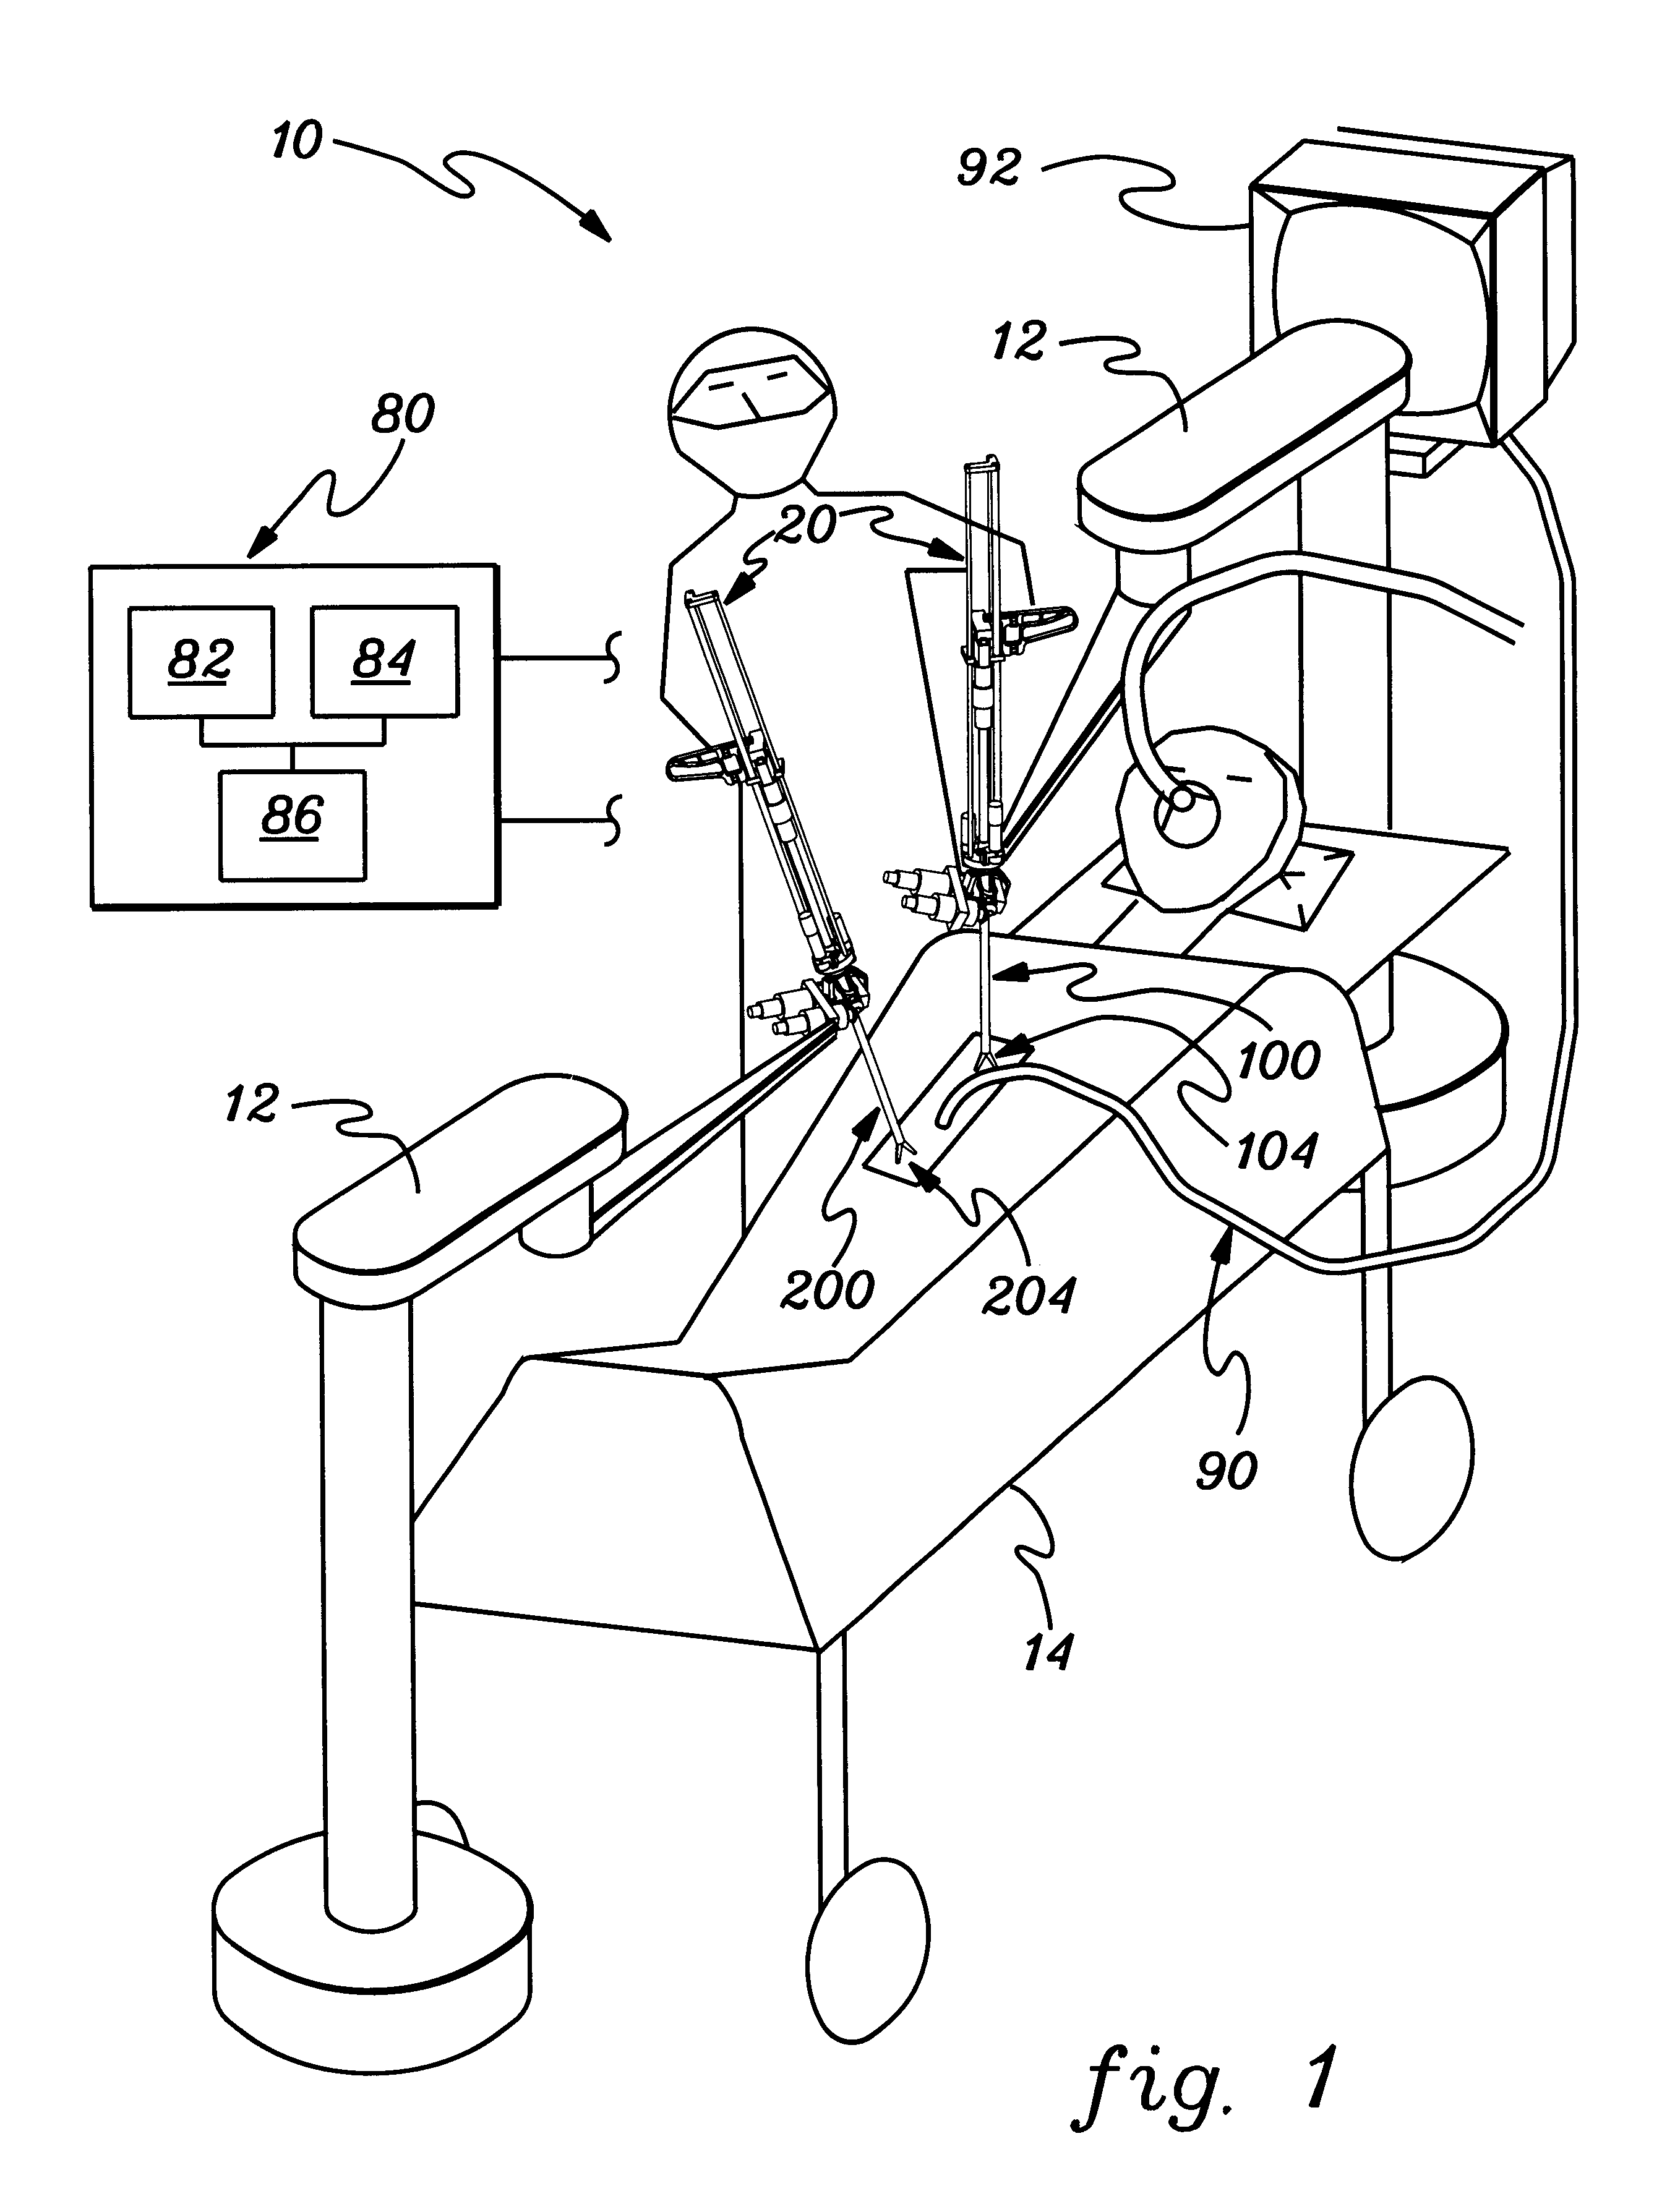 Robotic system, docking station, and surgical tool for collaborative control in minimally invasive surgery